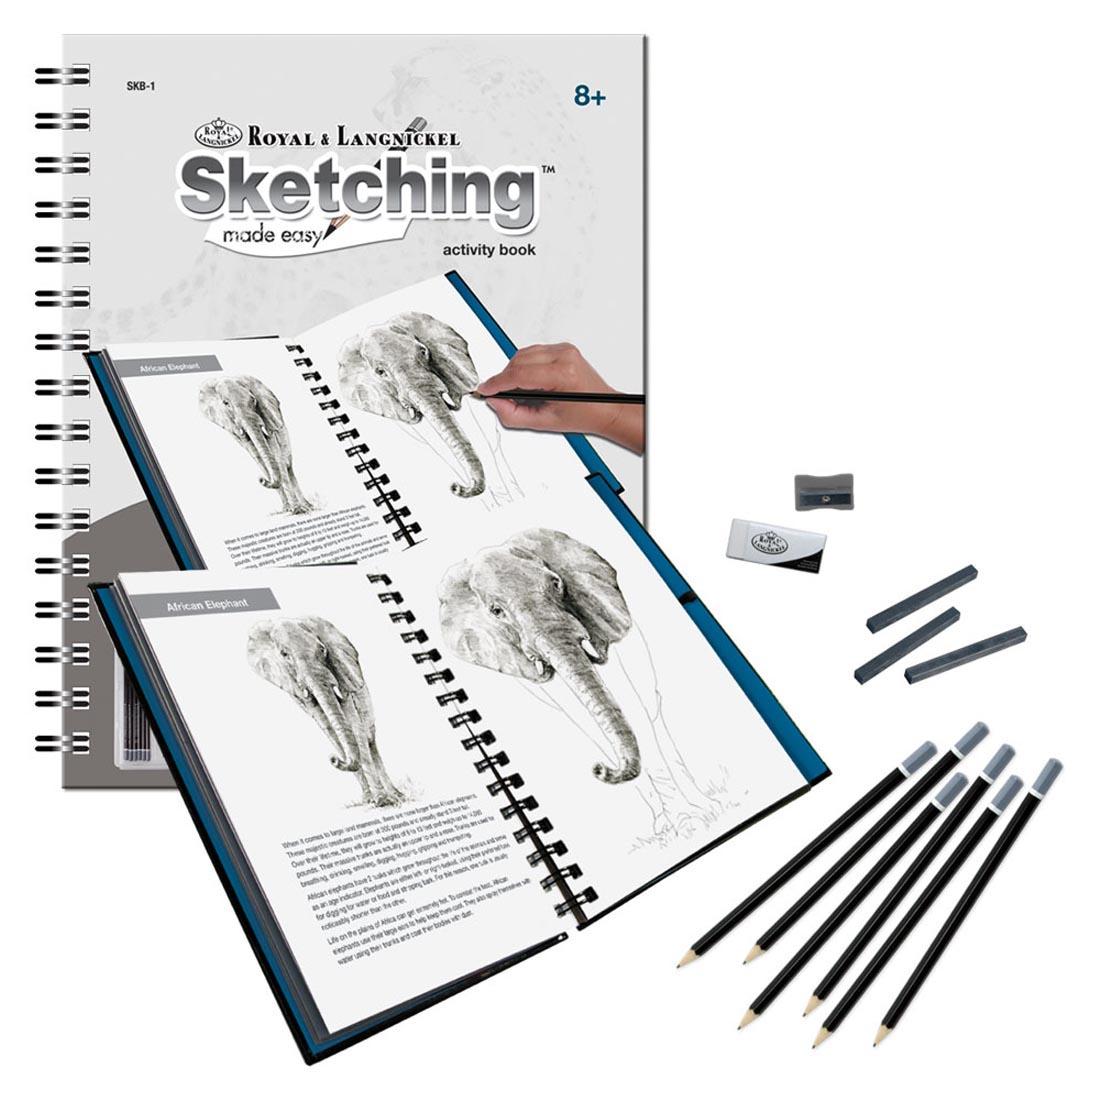 Royal & Langnickel Sketching Made Easy Activity Book shown both closed and open with the included graphite pencils, sketching sticks, eraser and sharpener